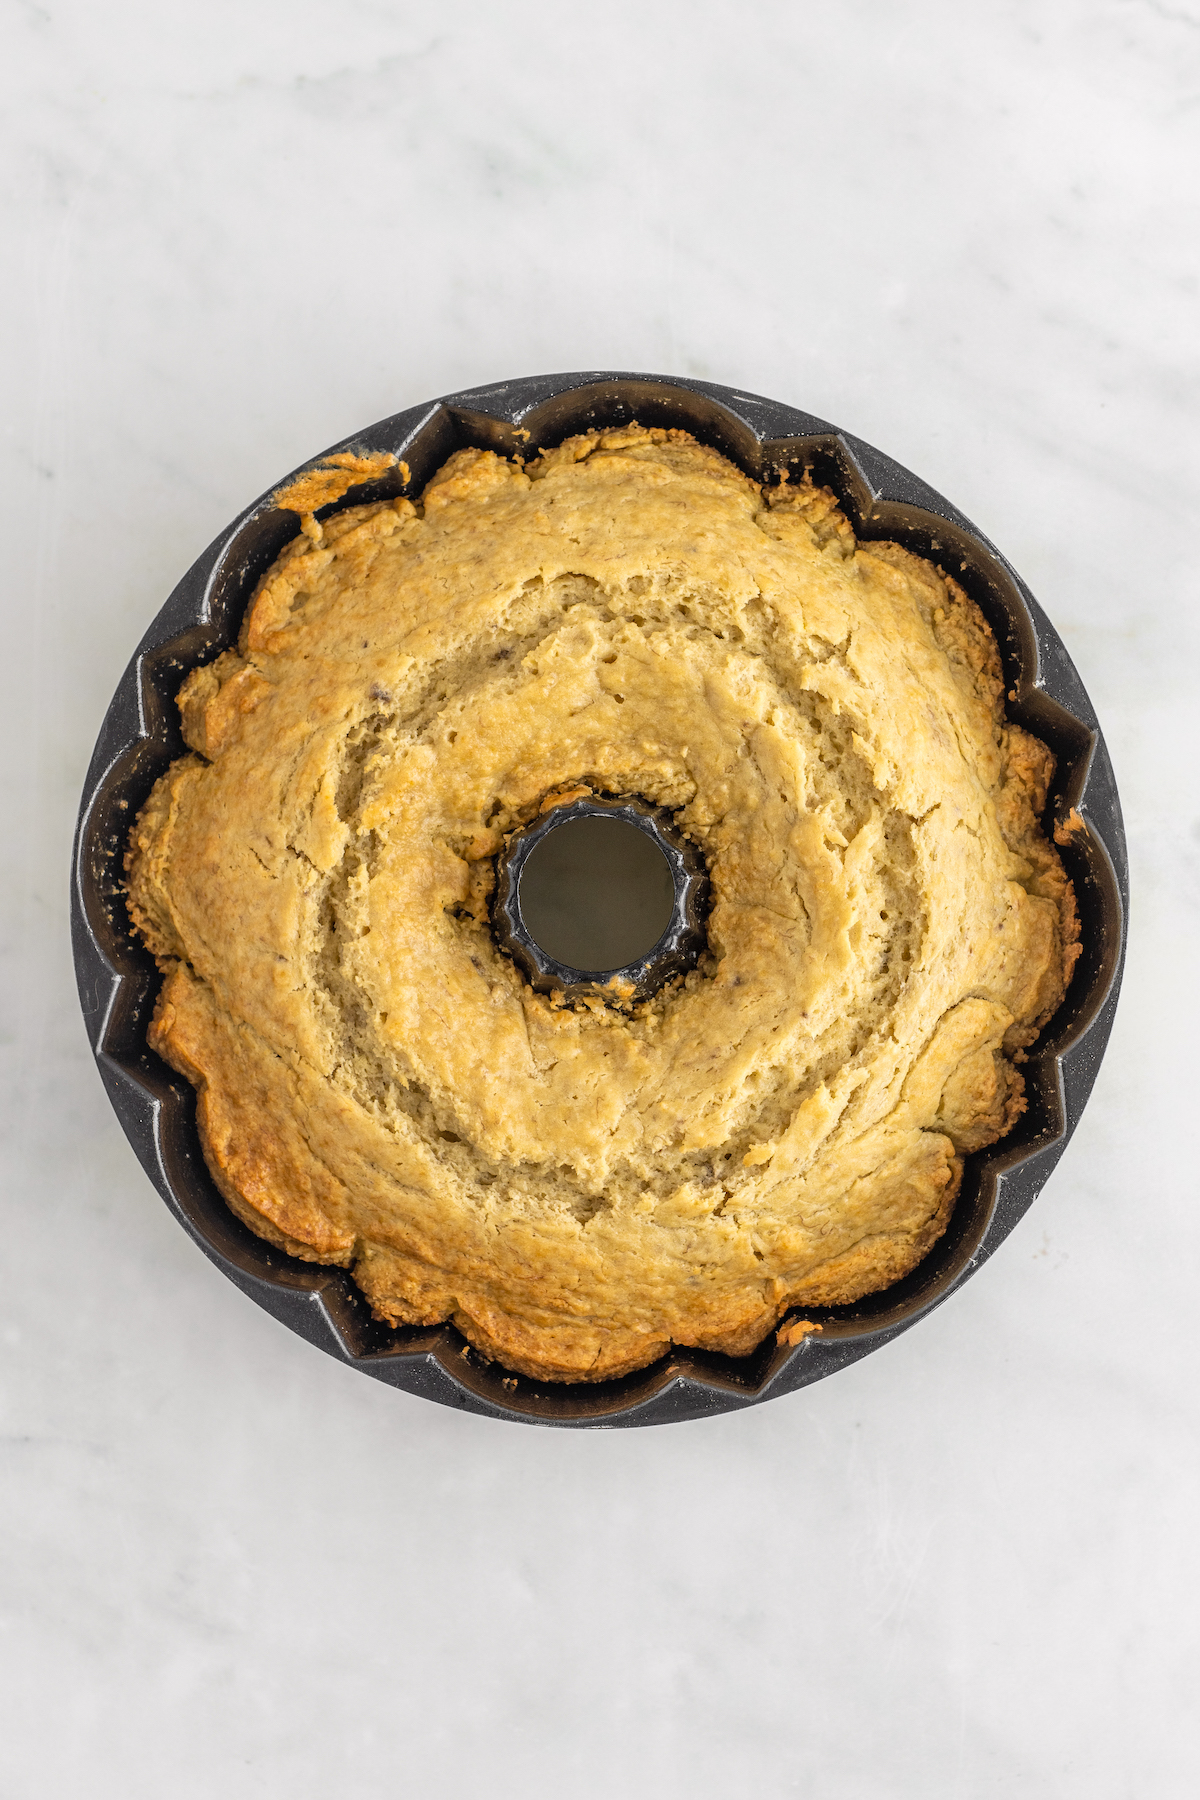 A baked banana bundt cake in the pan.